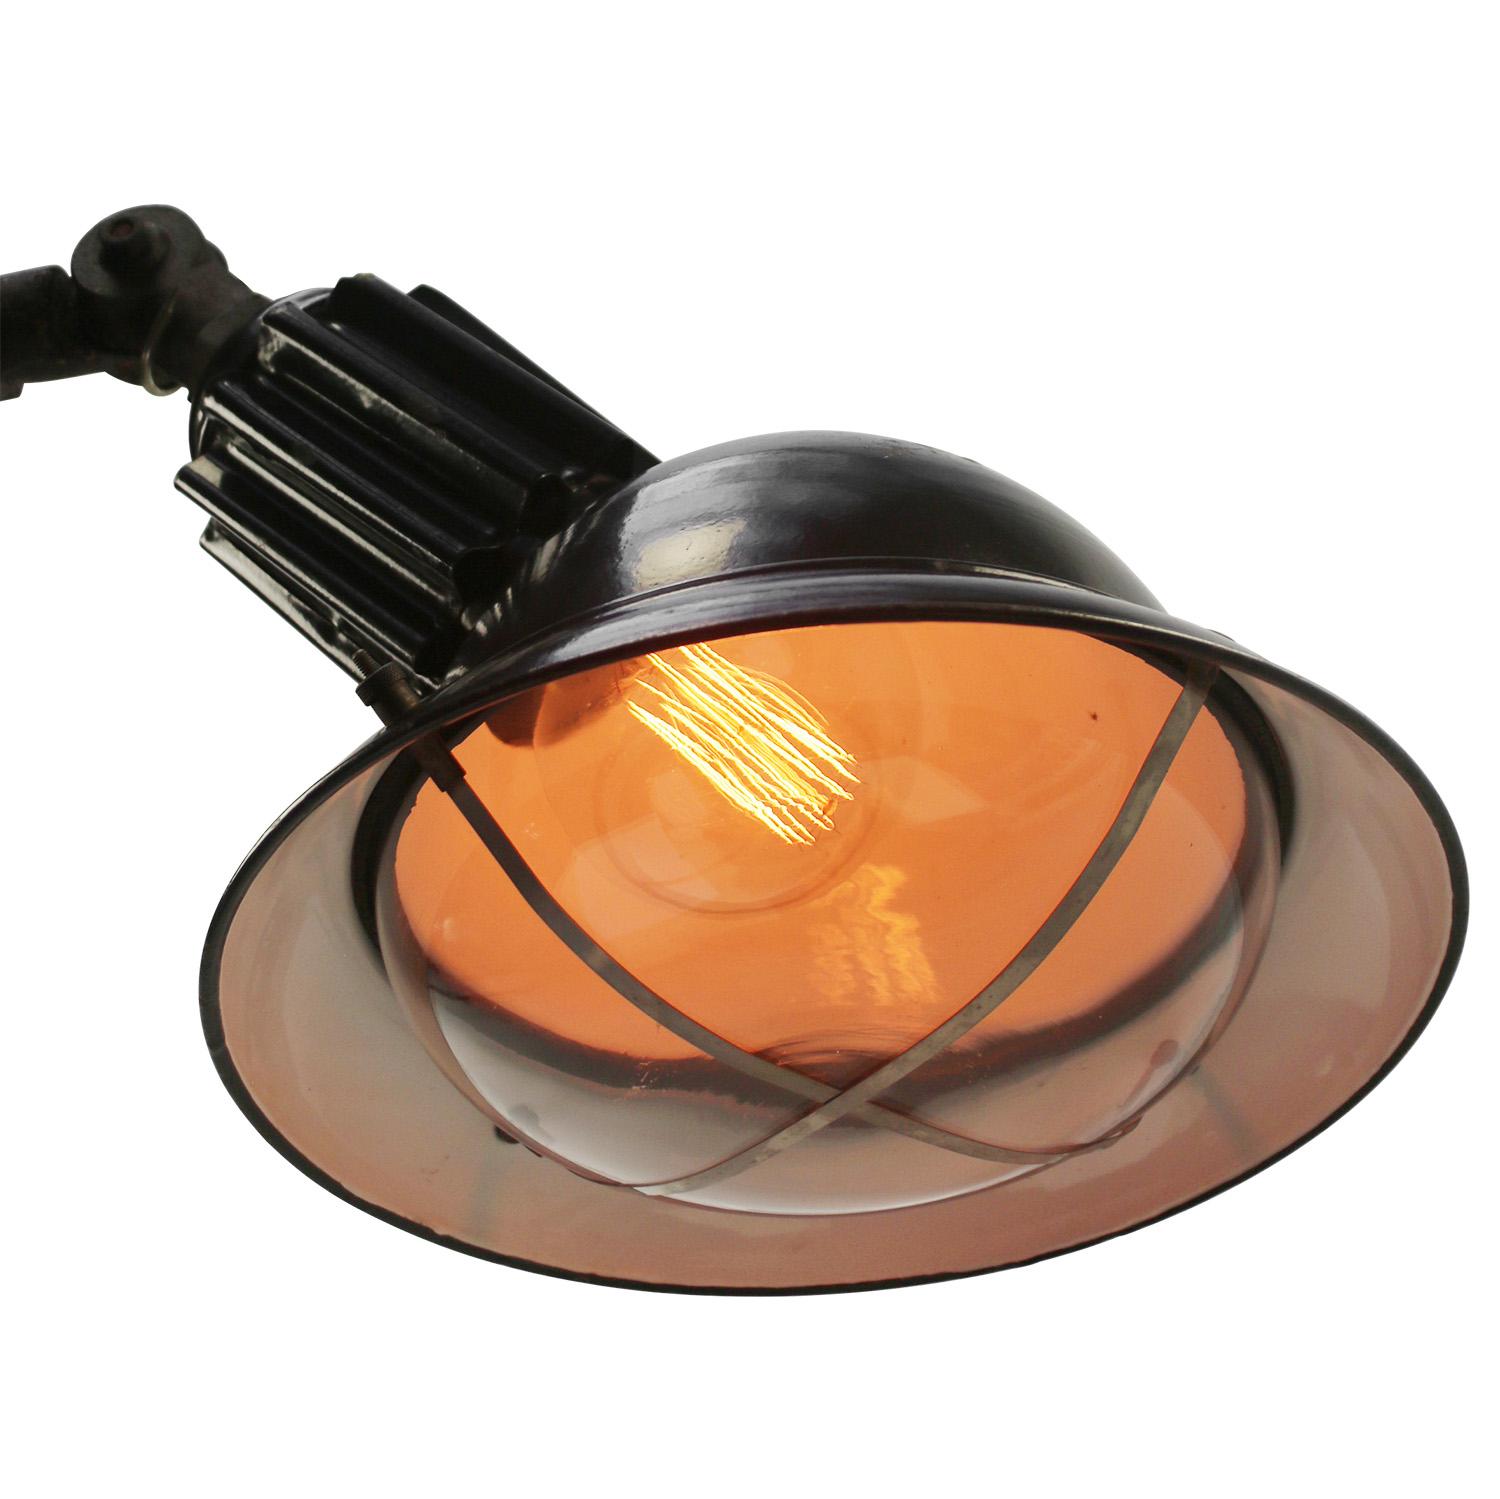 French asymmetrical black industrial wall lamp with round clear glass.
Black enamel. Rare model.

Diameter wall mount 17 cm / 6.7 inches

Weight: 7.40 kg / 16.3 lb

Priced per individual item. All lamps have been made suitable by international